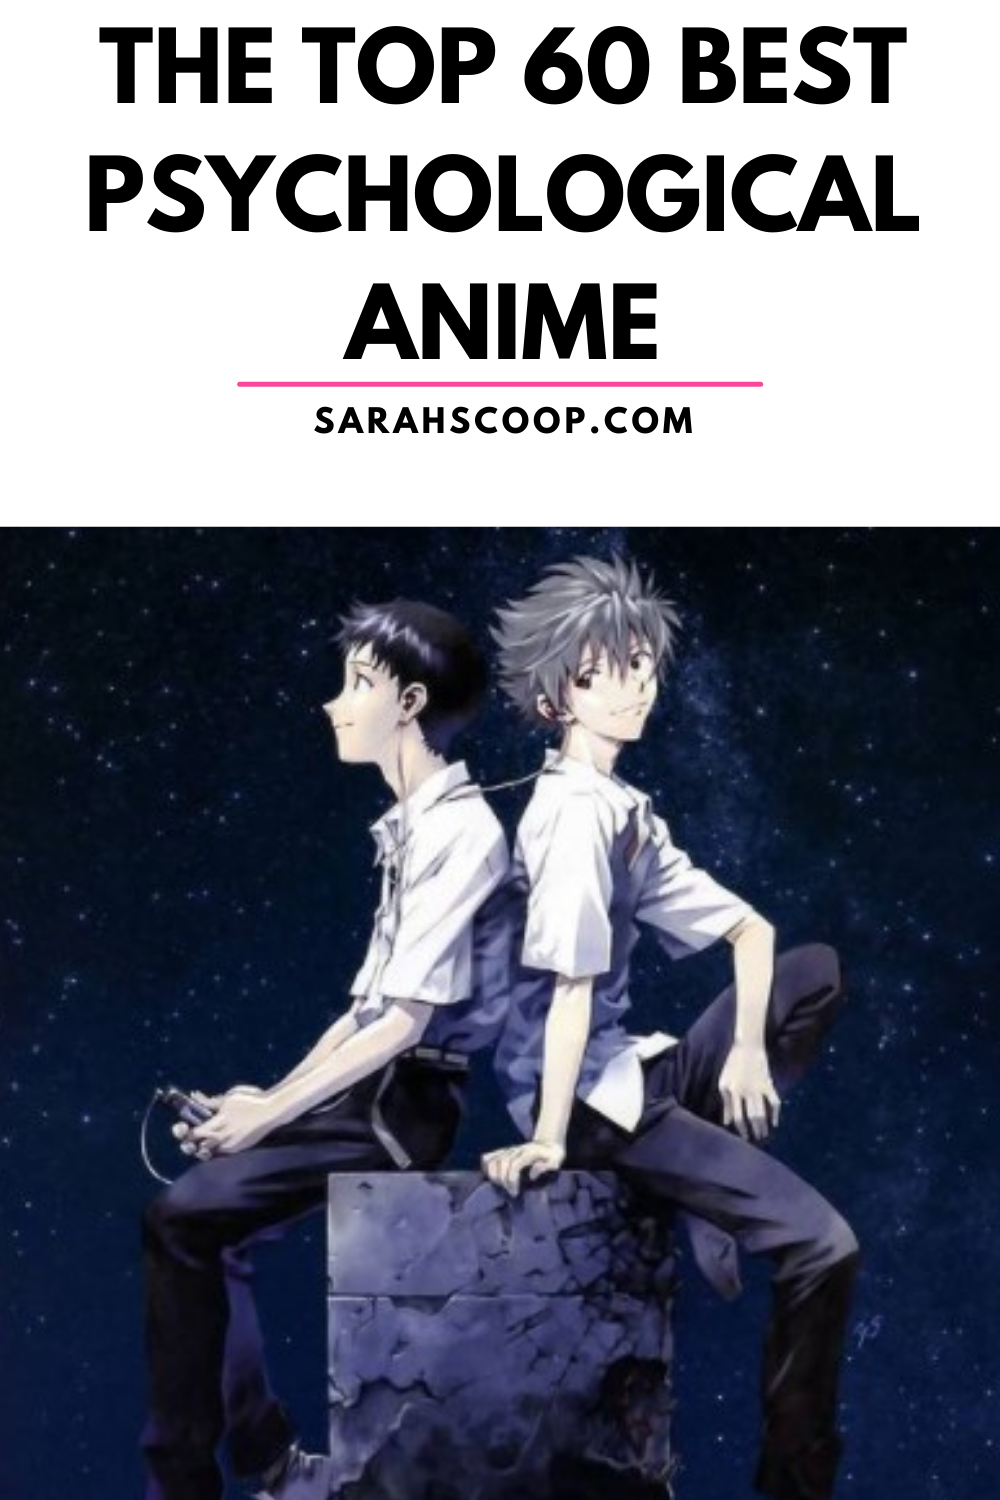 The Top 60 Best Psychological Anime - Sarah Scoop